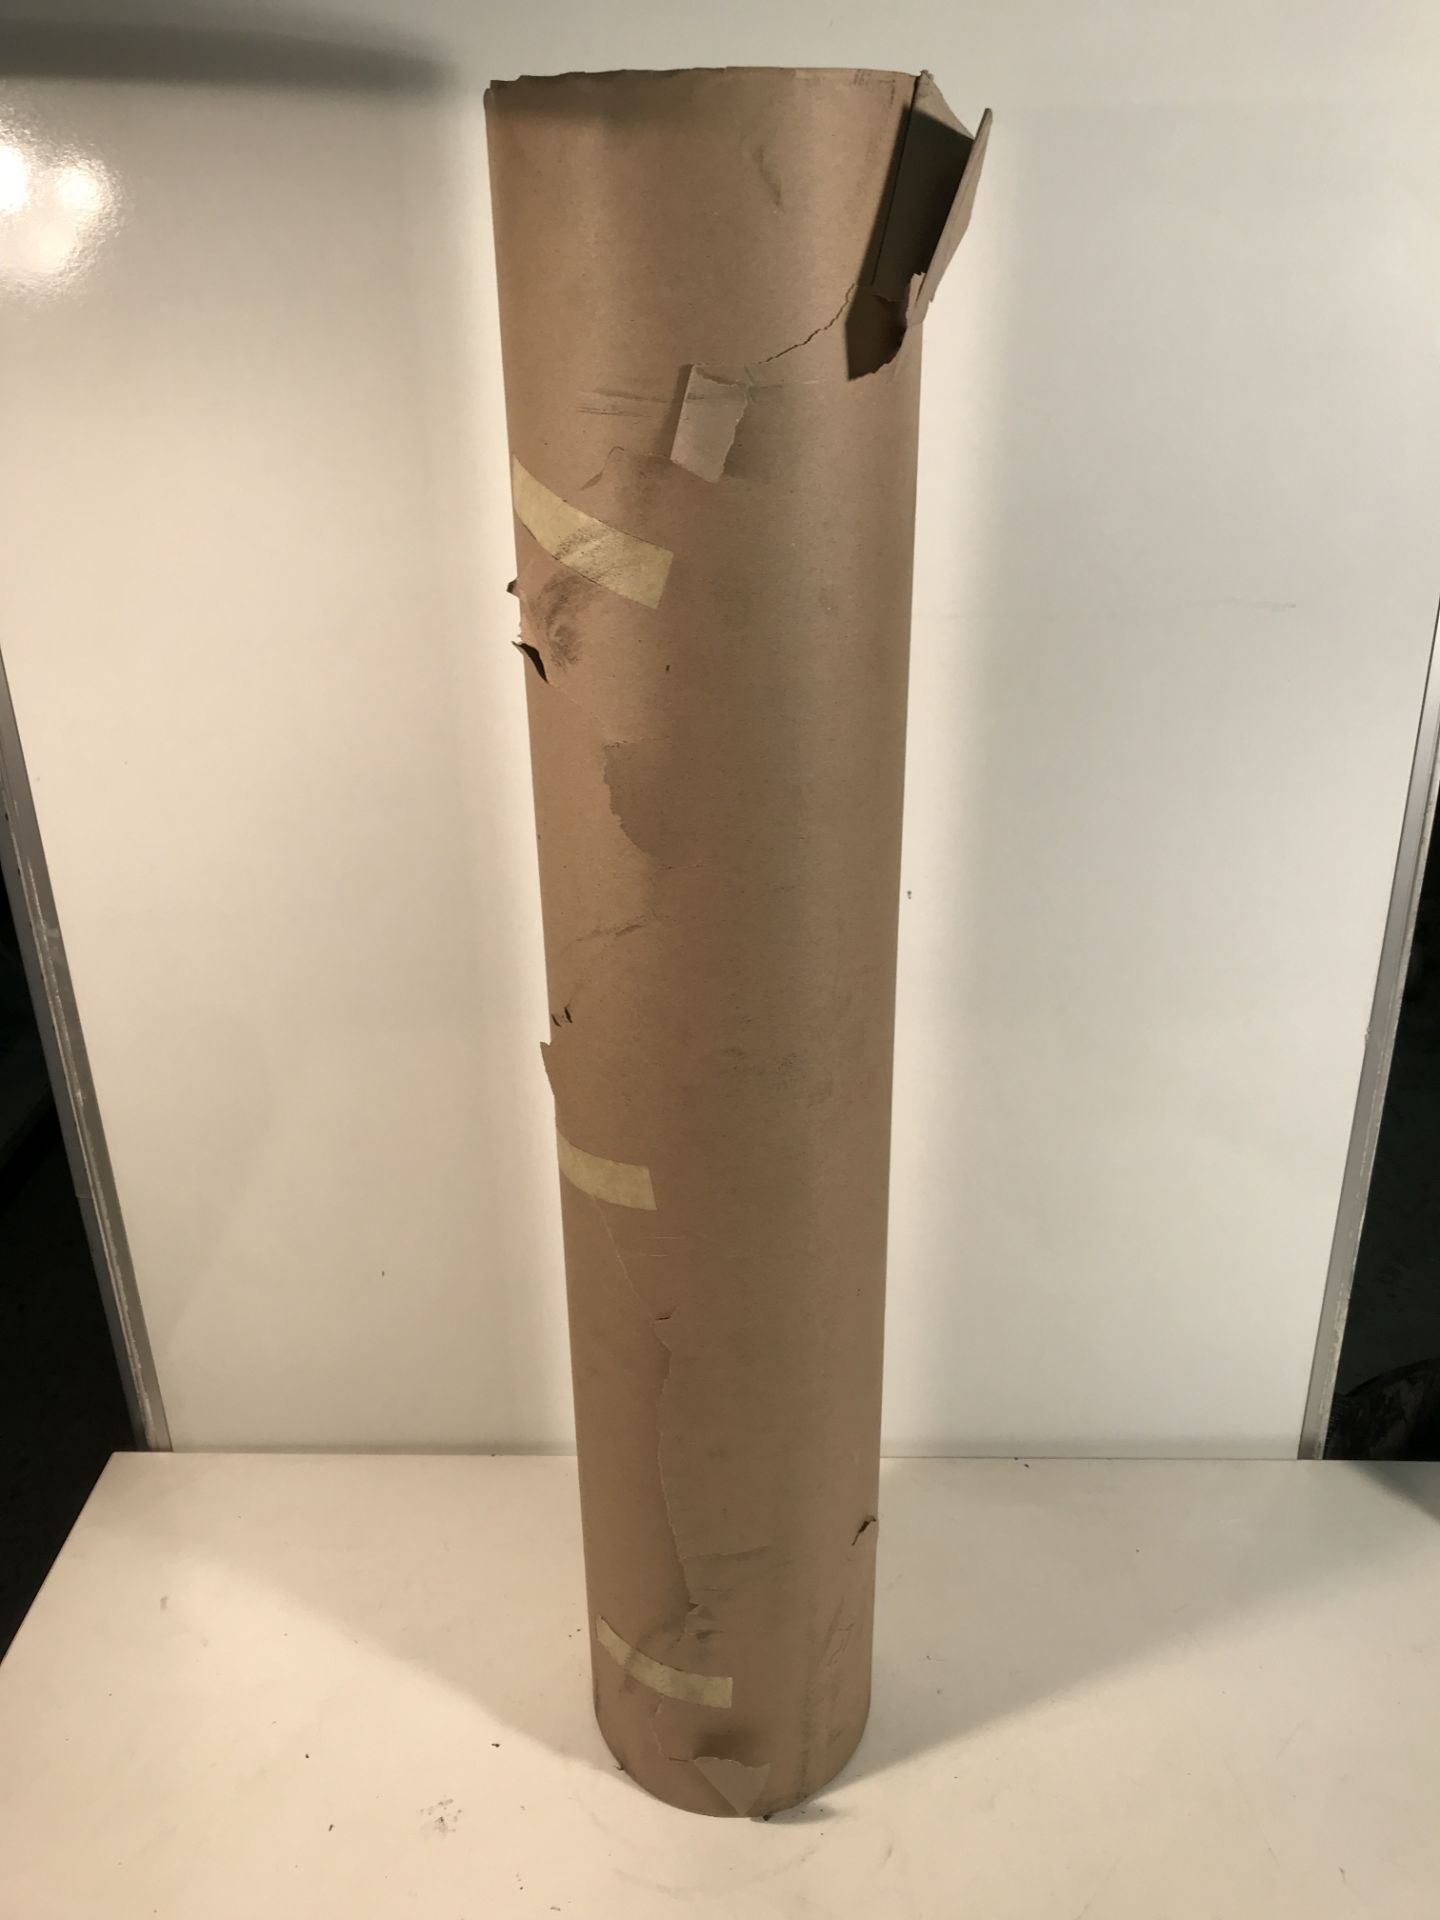 Large Roll of Brown Packaging Paper